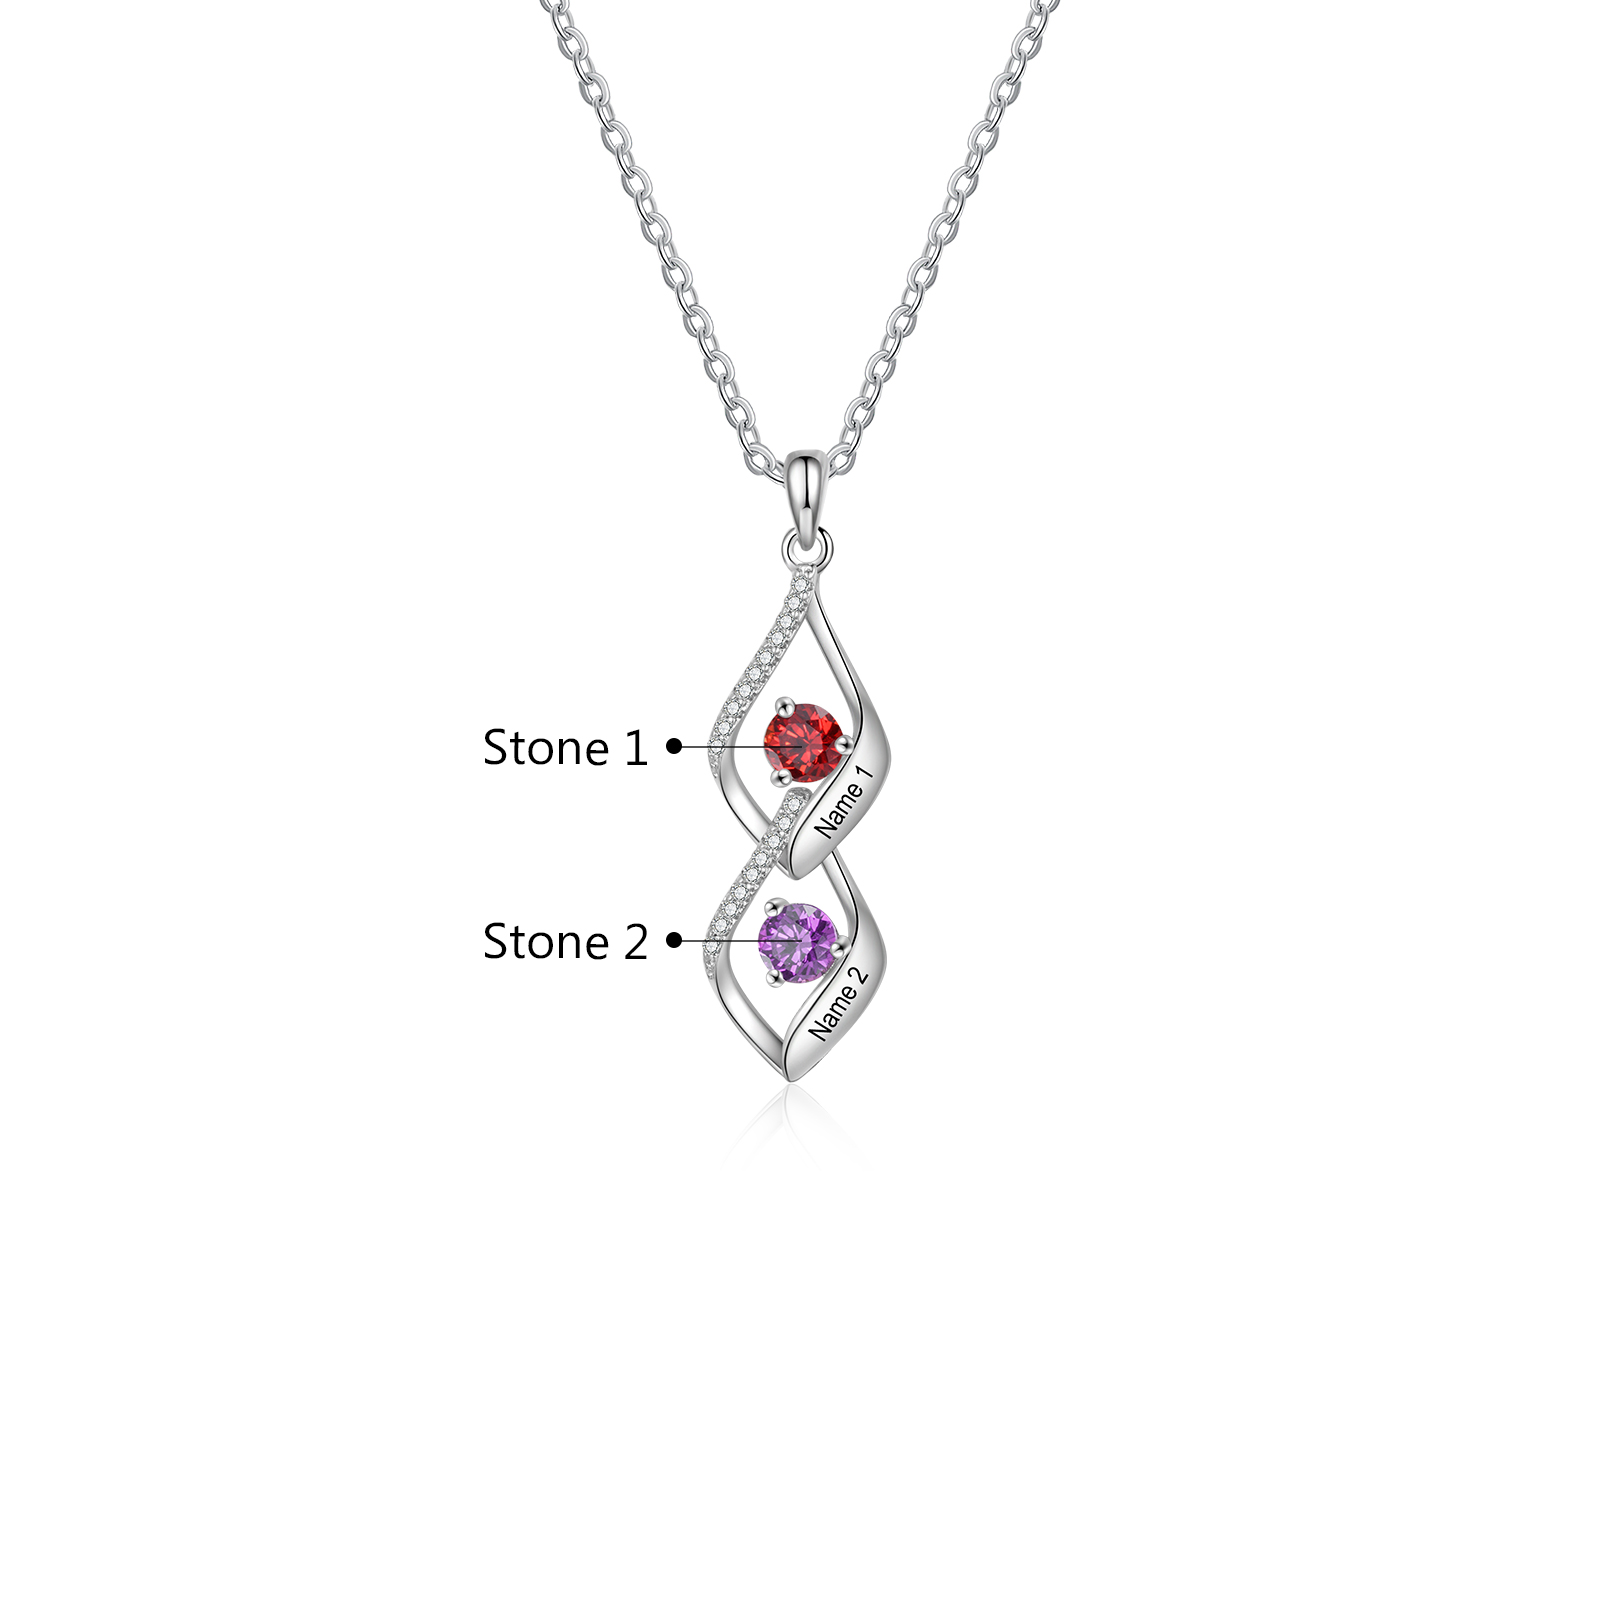 2 Names - Personalized Necklace Custom Birthstone Necklace Engraved with Name A special Gift For Mom/Grandma